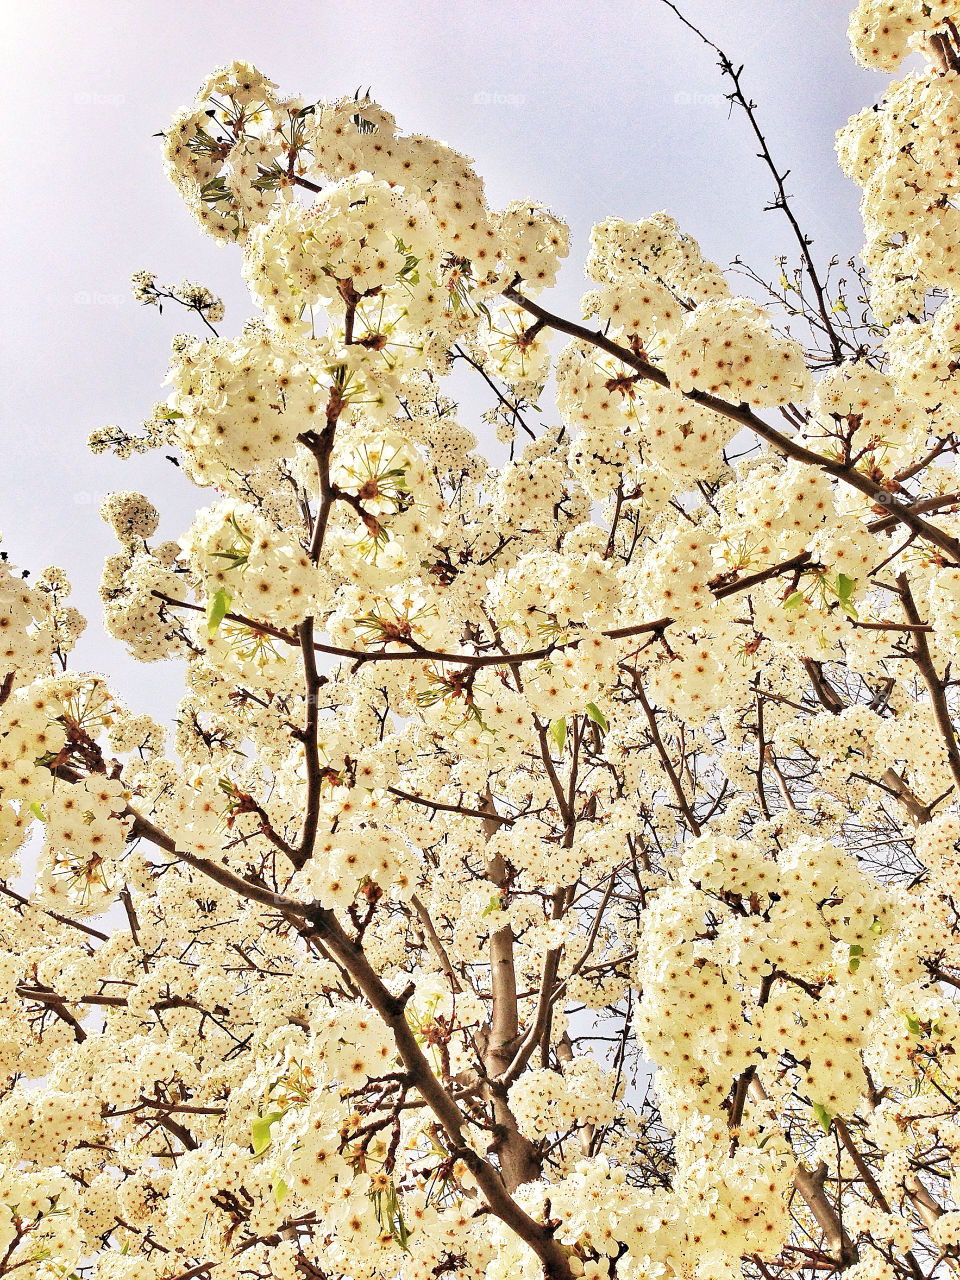 Radiant white and yellow petals of pear tree in bloom